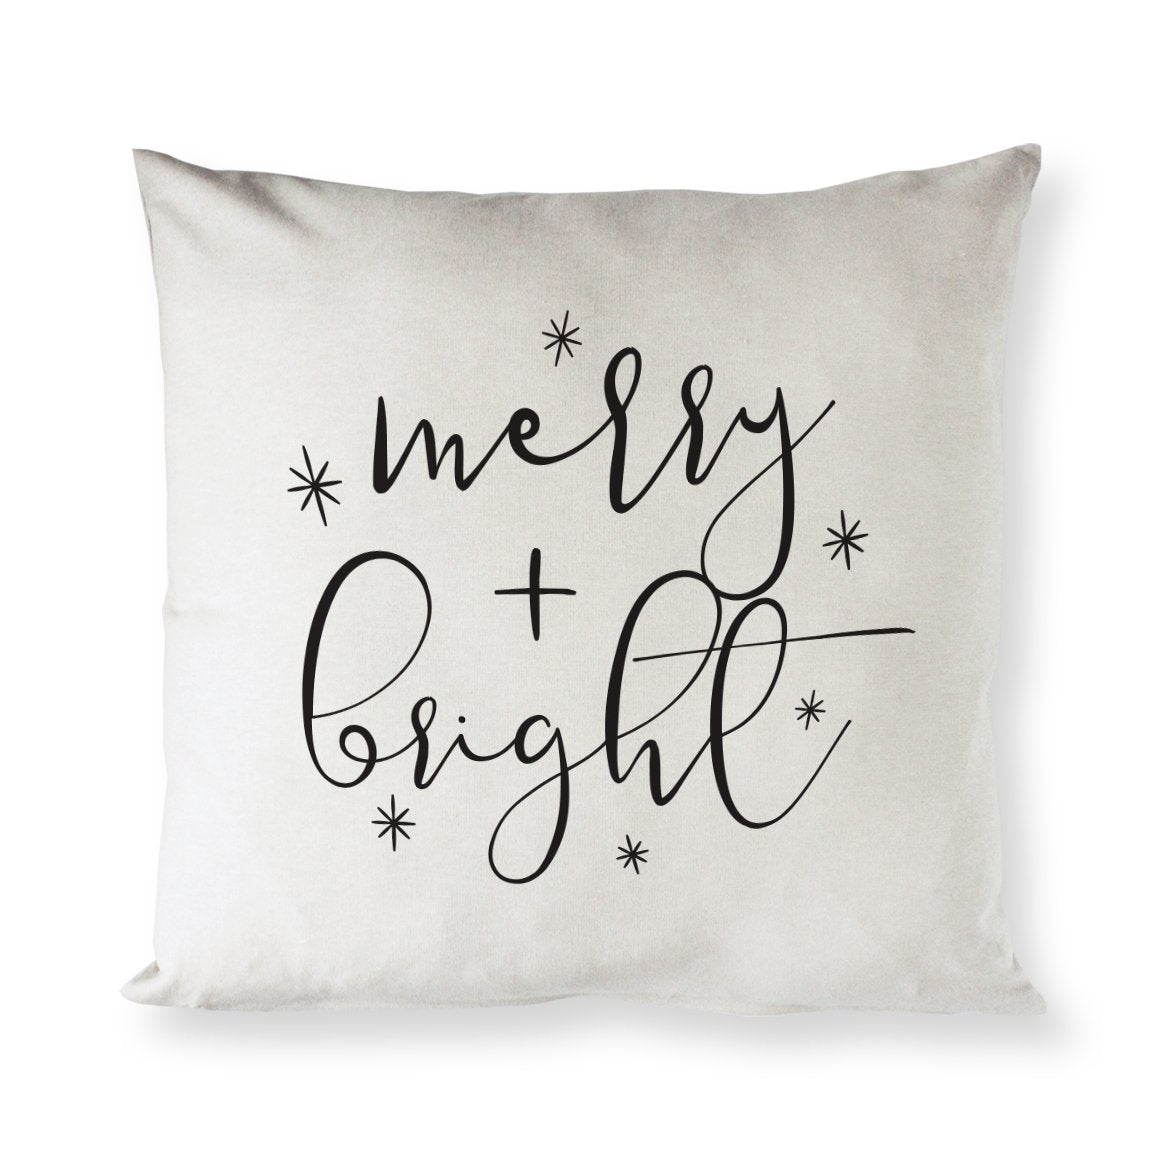 Merry and Bright Cotton Canvas Christmas Holiday Pillow Cover